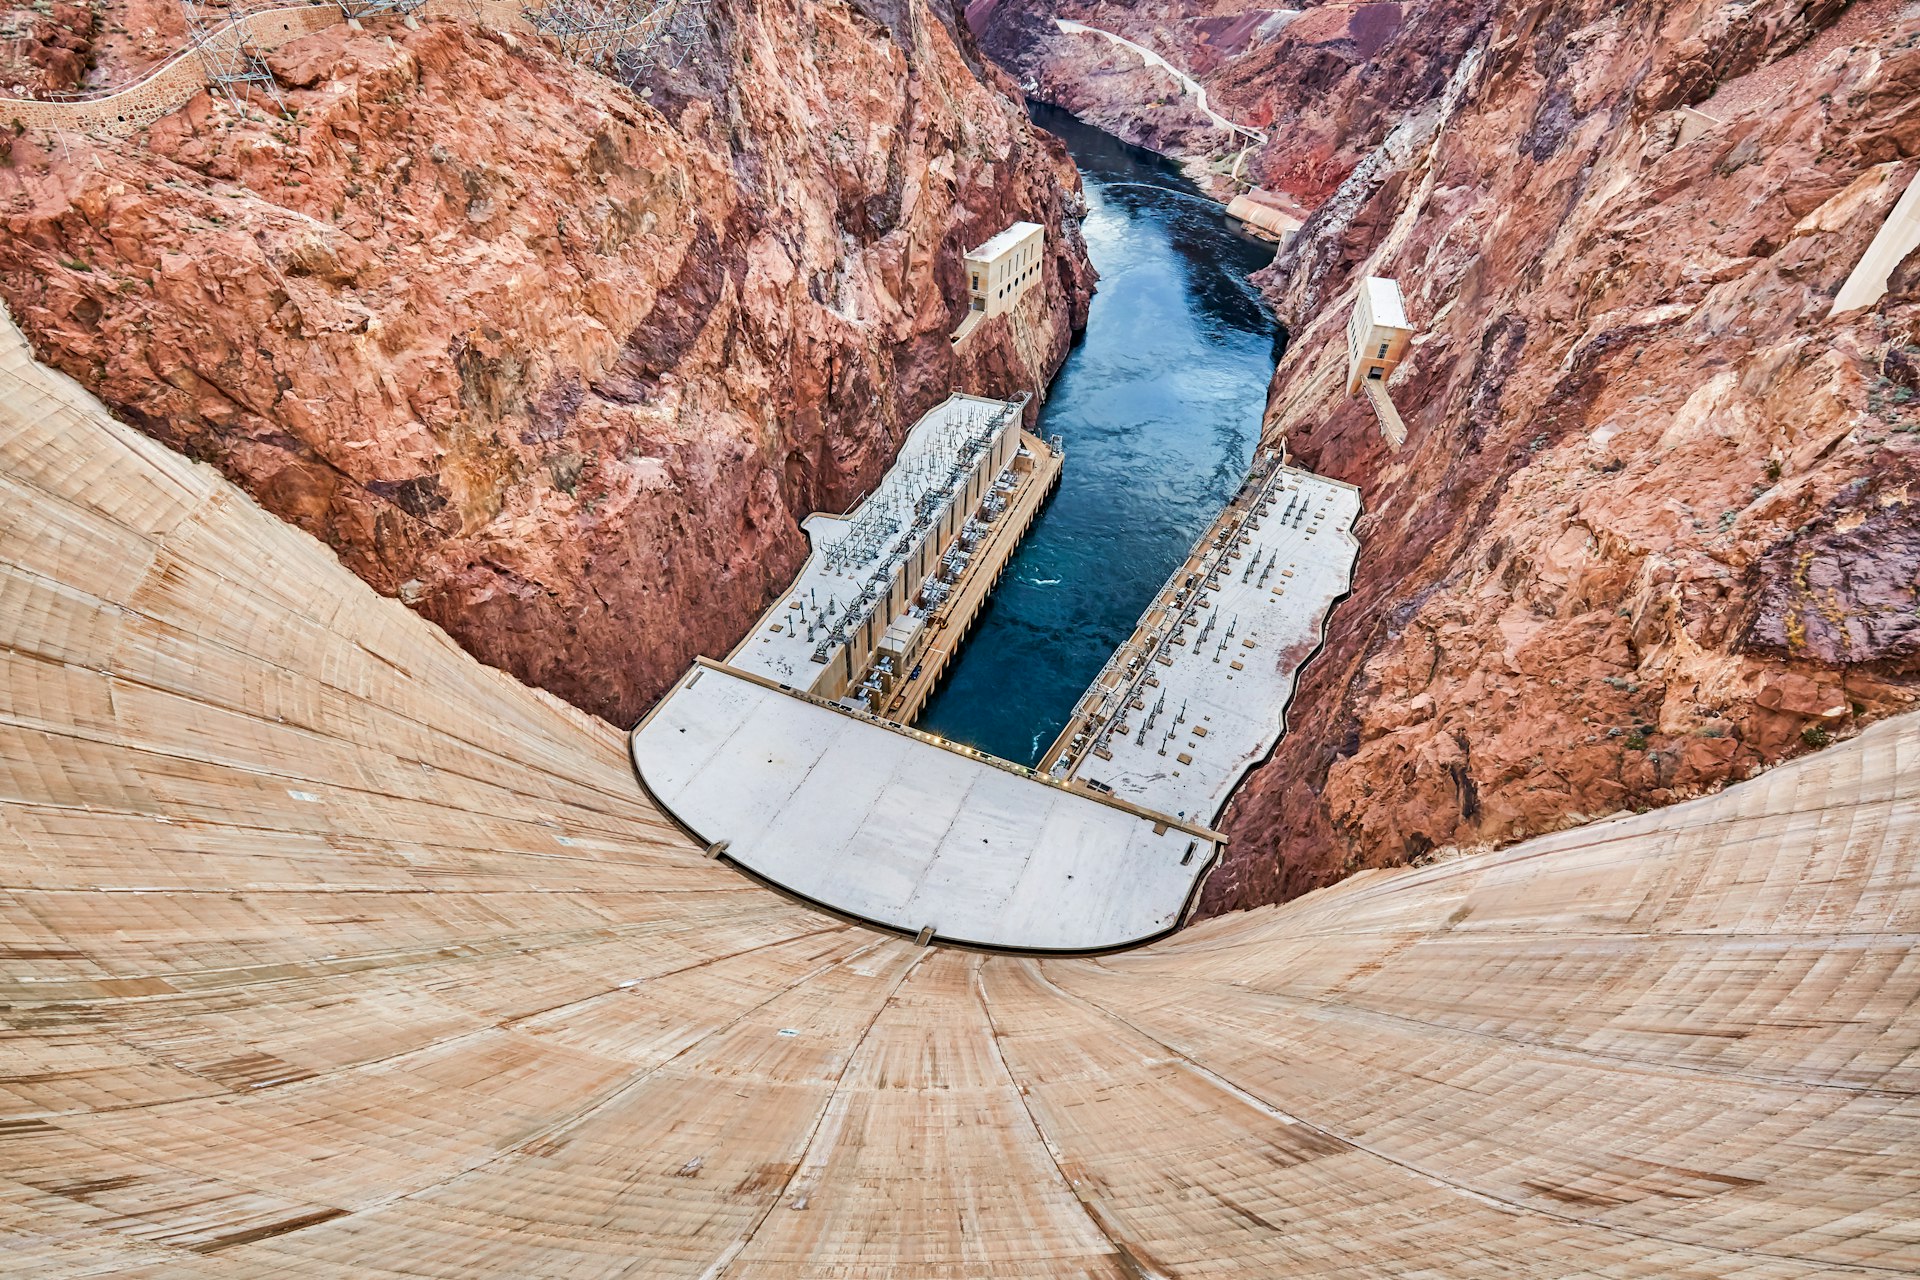 Concrete dam and spill way of the Hoover Dam on the Colorado River, Nevada, USA